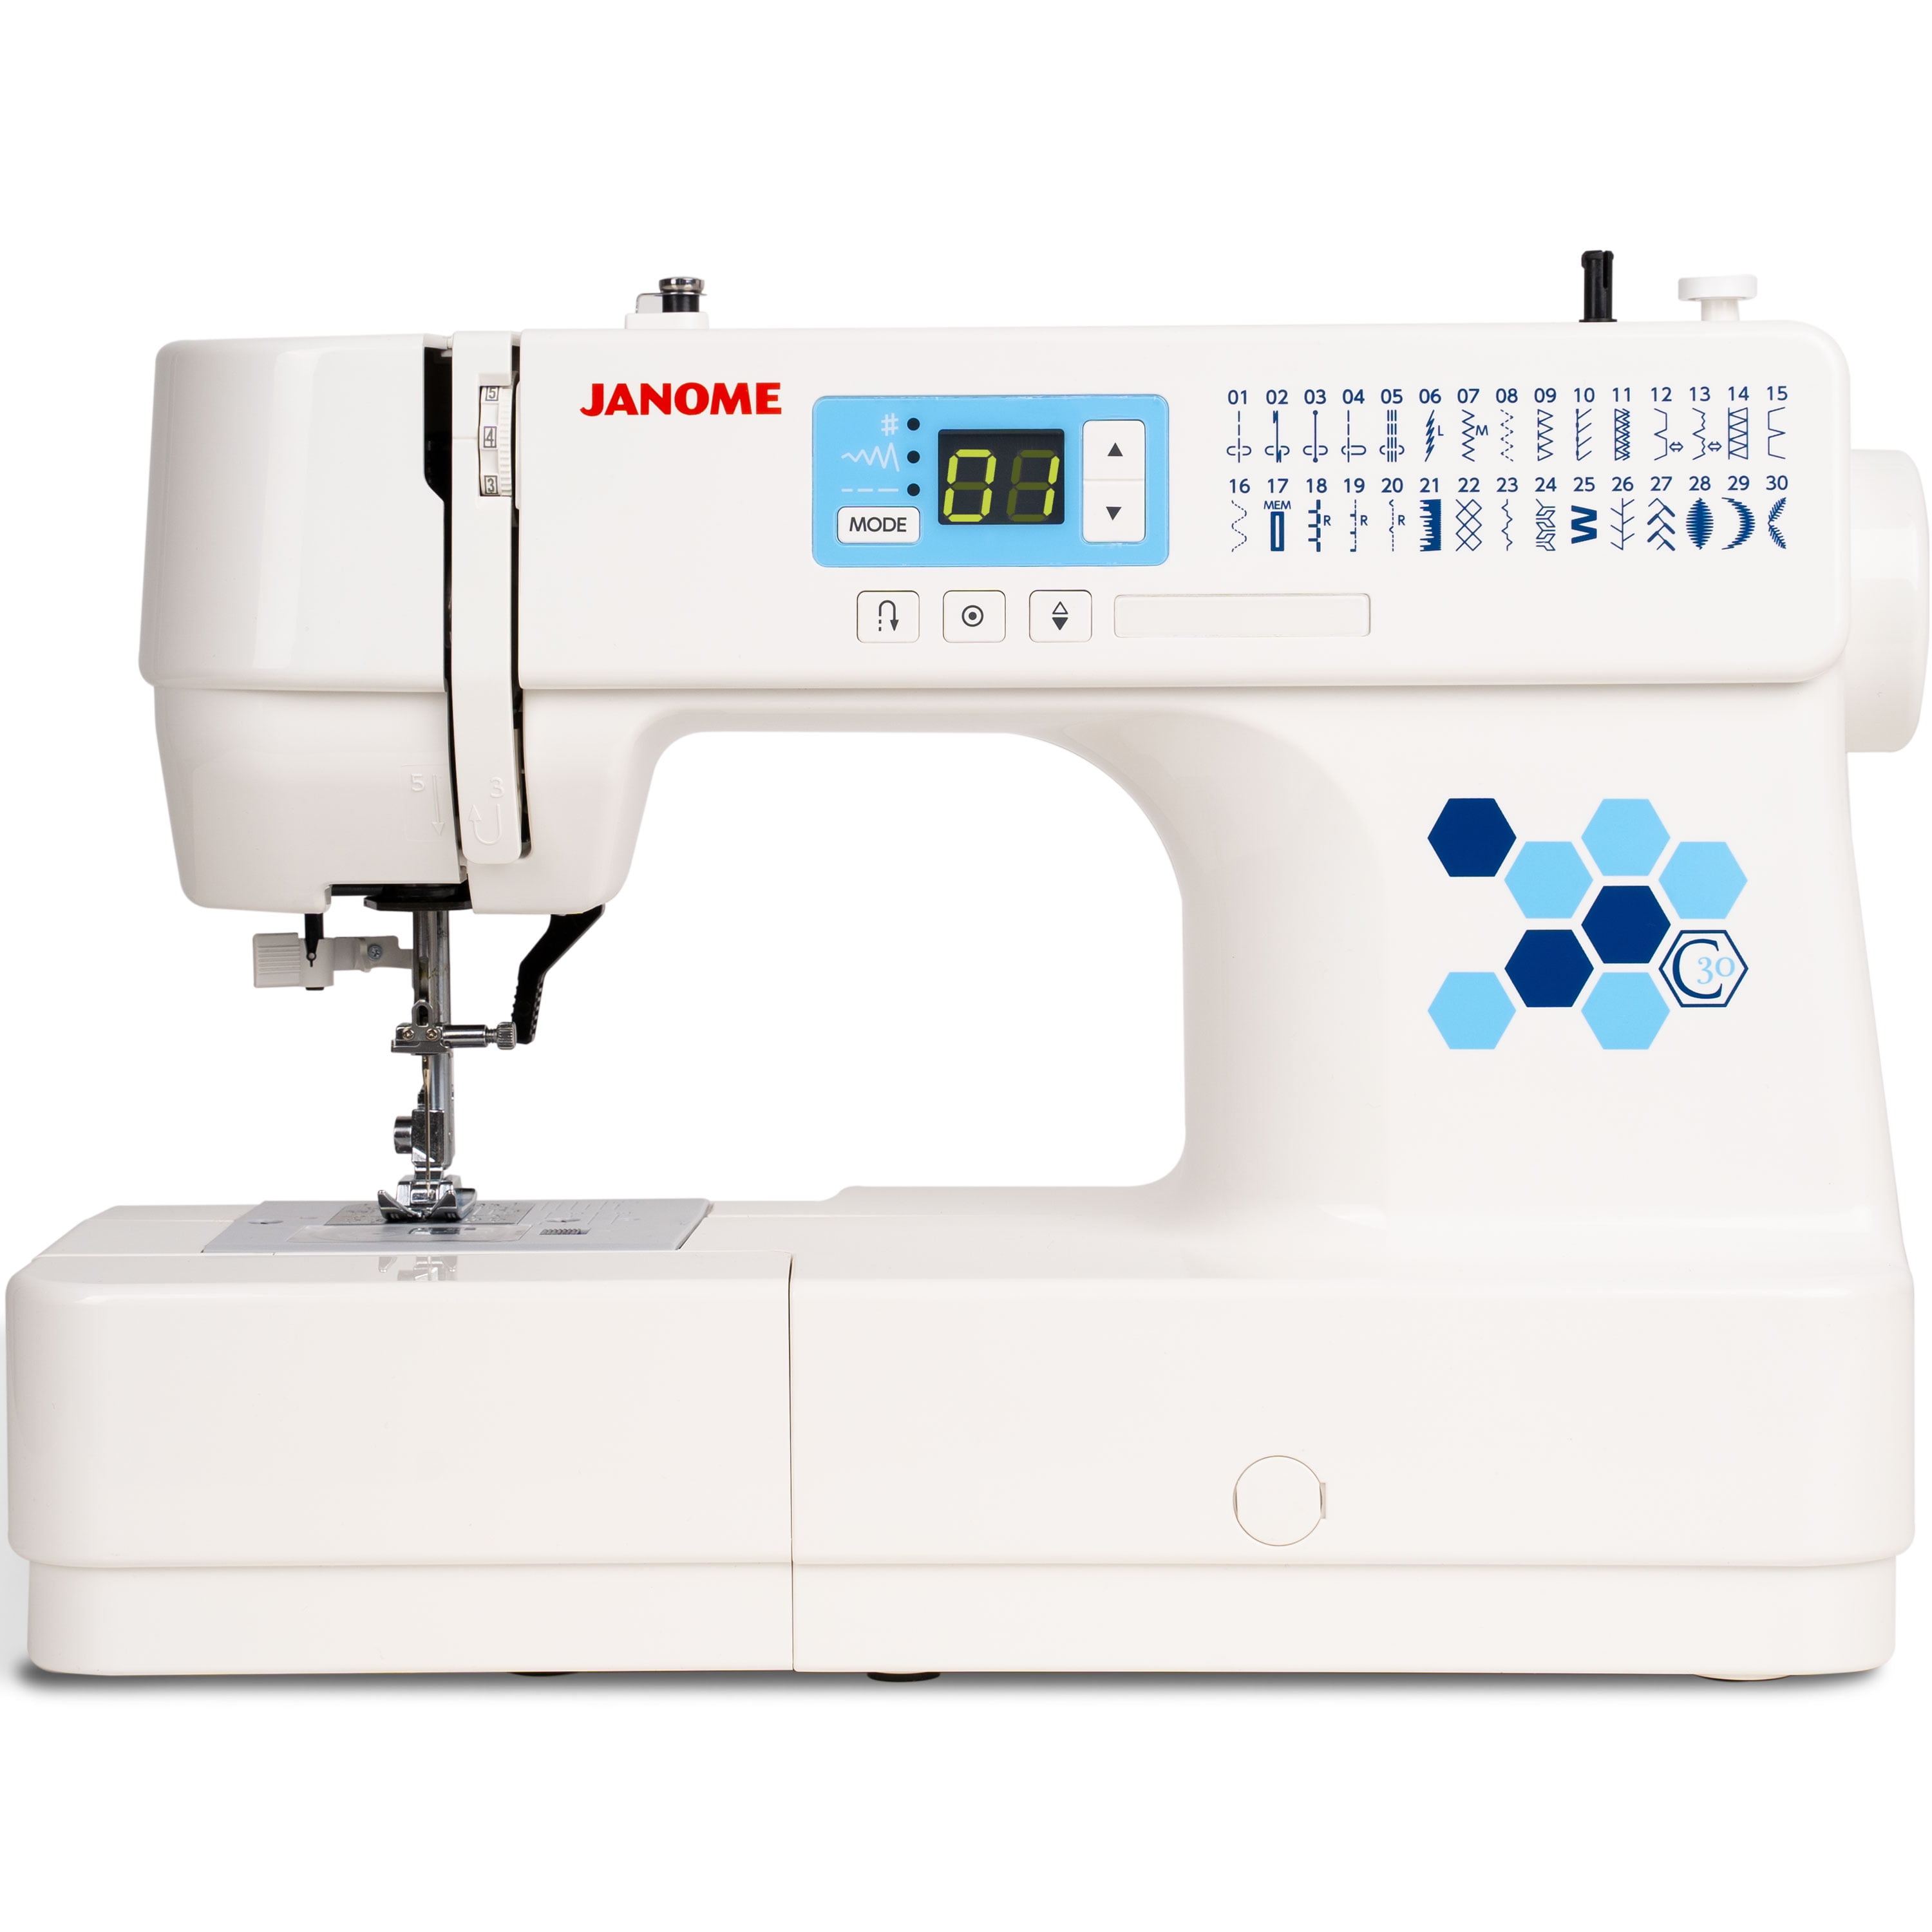 Janome JW8100 Fully-Featured Computerized Sewing Machine with 100 